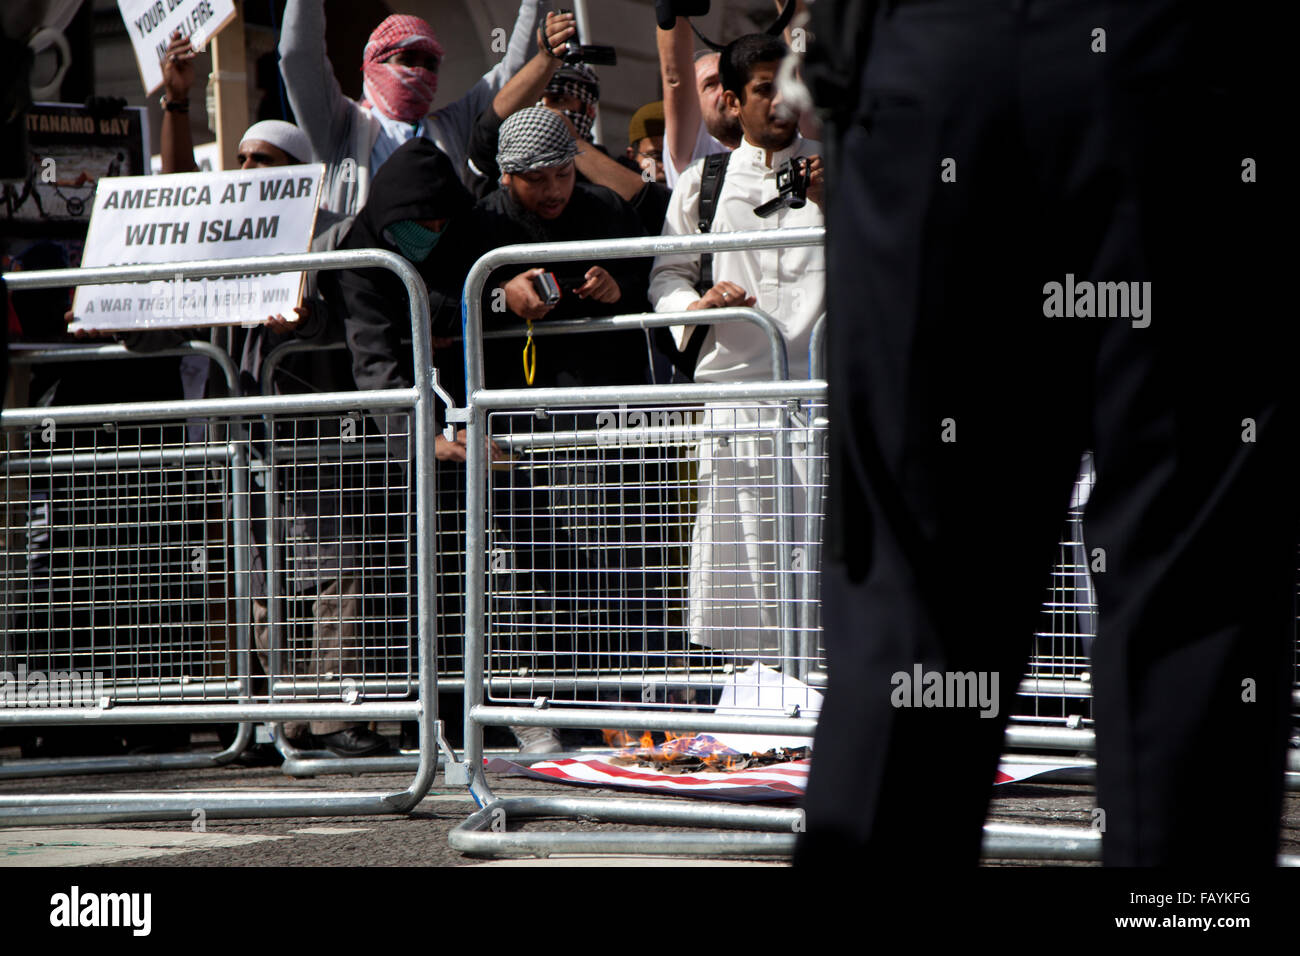 FILE IMAGE - London, UK. 11th Sept, 2011. Siddhartha Dhar films an american flag being burnt whilst attending a 9/11 protest outside US embassy in 2011. Credit:  nelson pereira/Alamy Live News Stock Photo